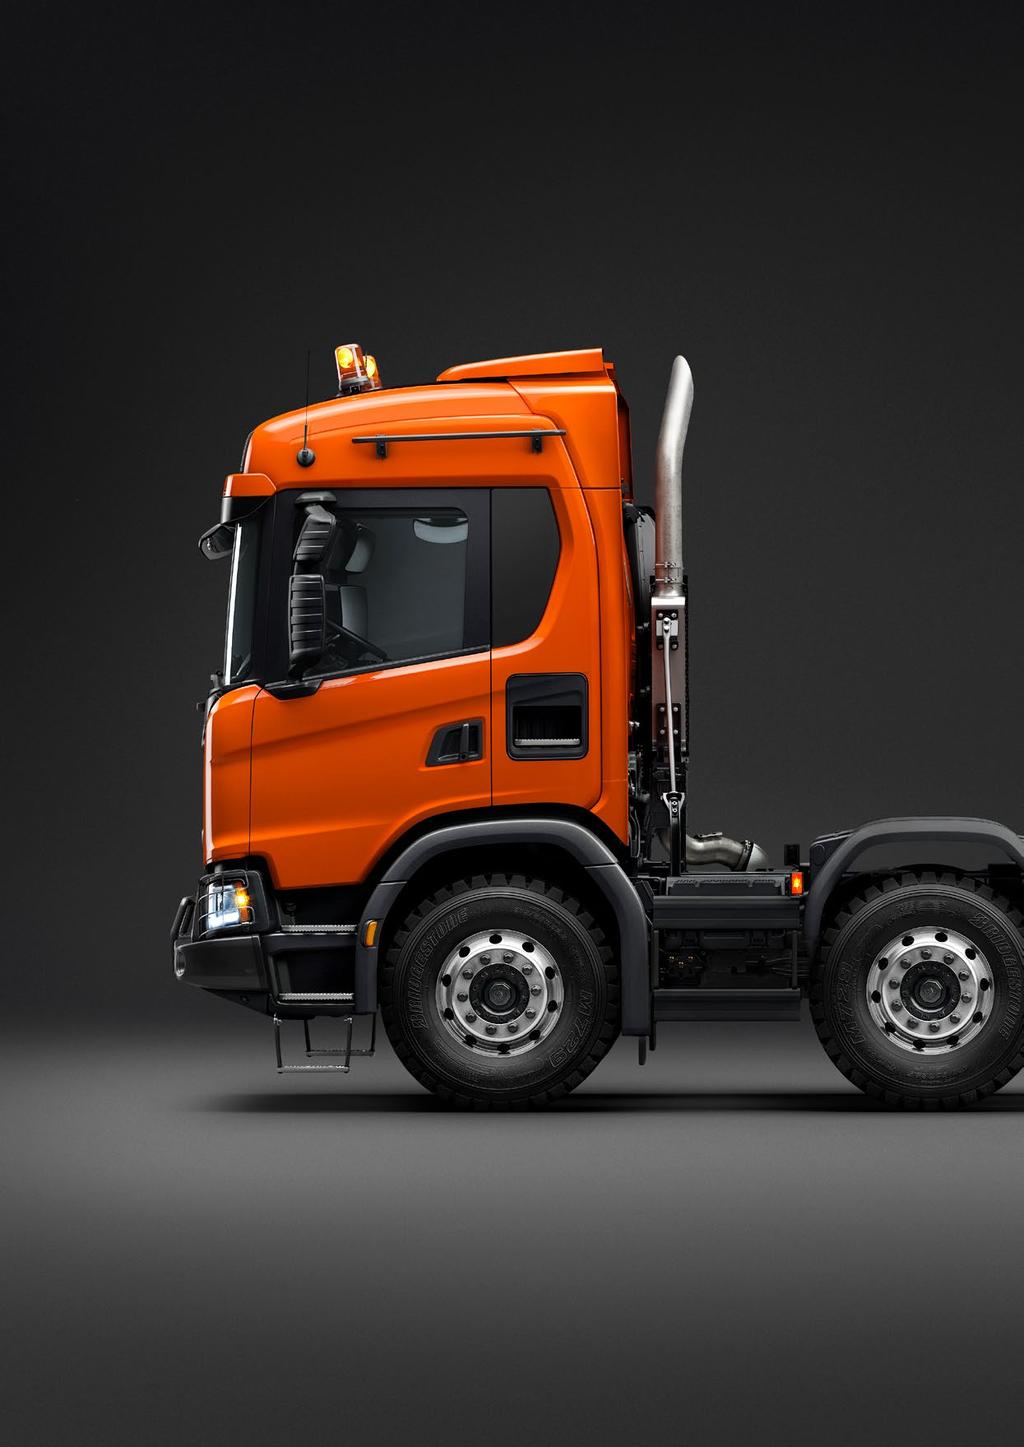 Cab The G-series day cab with normal roof offers an excellent driver environment with ample storage. The side body step makes it easy to climb over to the tipper body for load inspection.